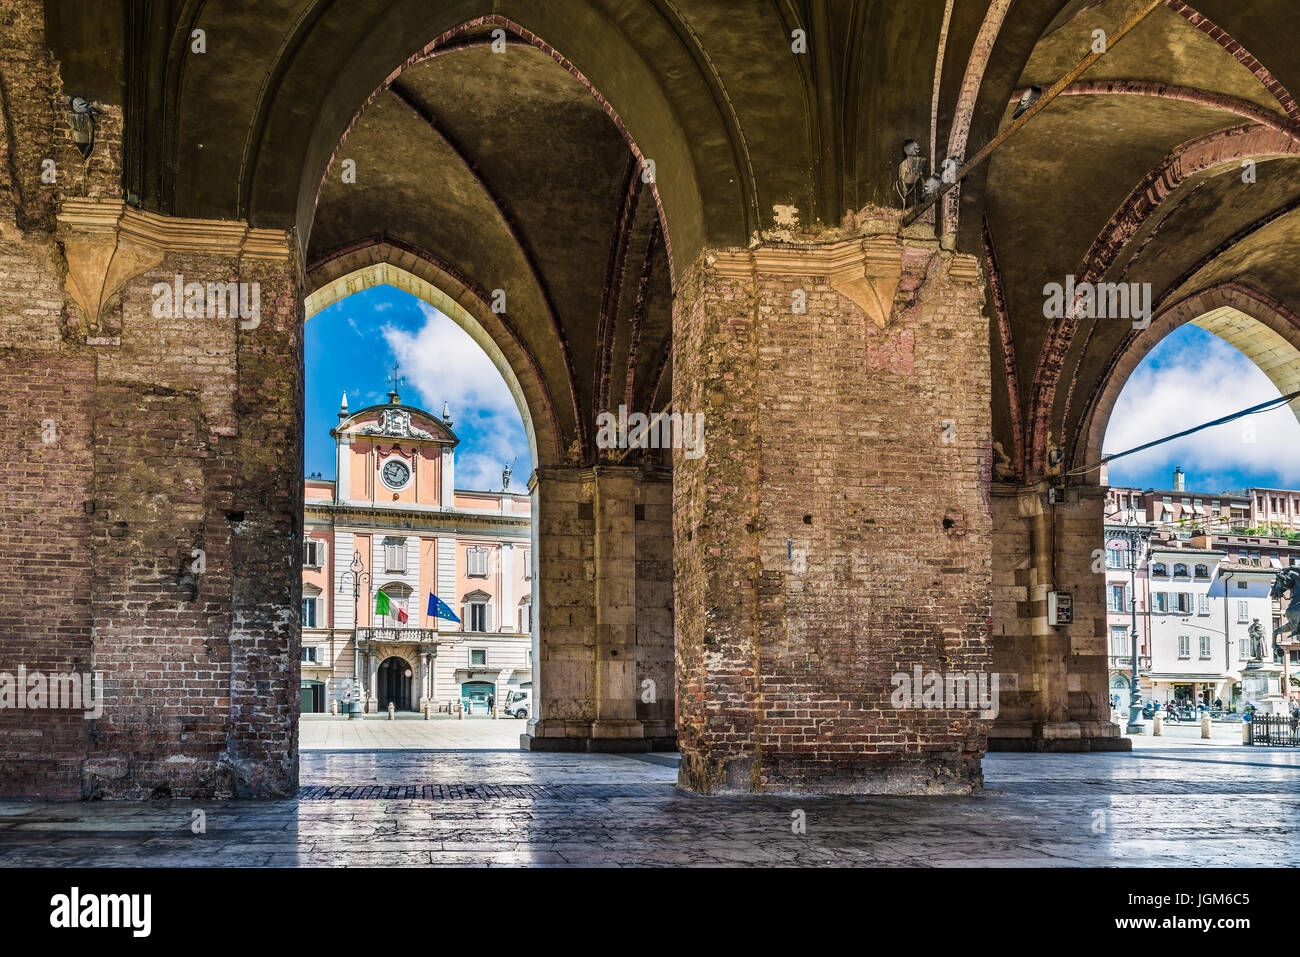 Piacenza, medieval town, Italy. Piazza Cavalli and Palazzo del Governatore from the arcade of palazzo Gotico in the city center Stock Photo